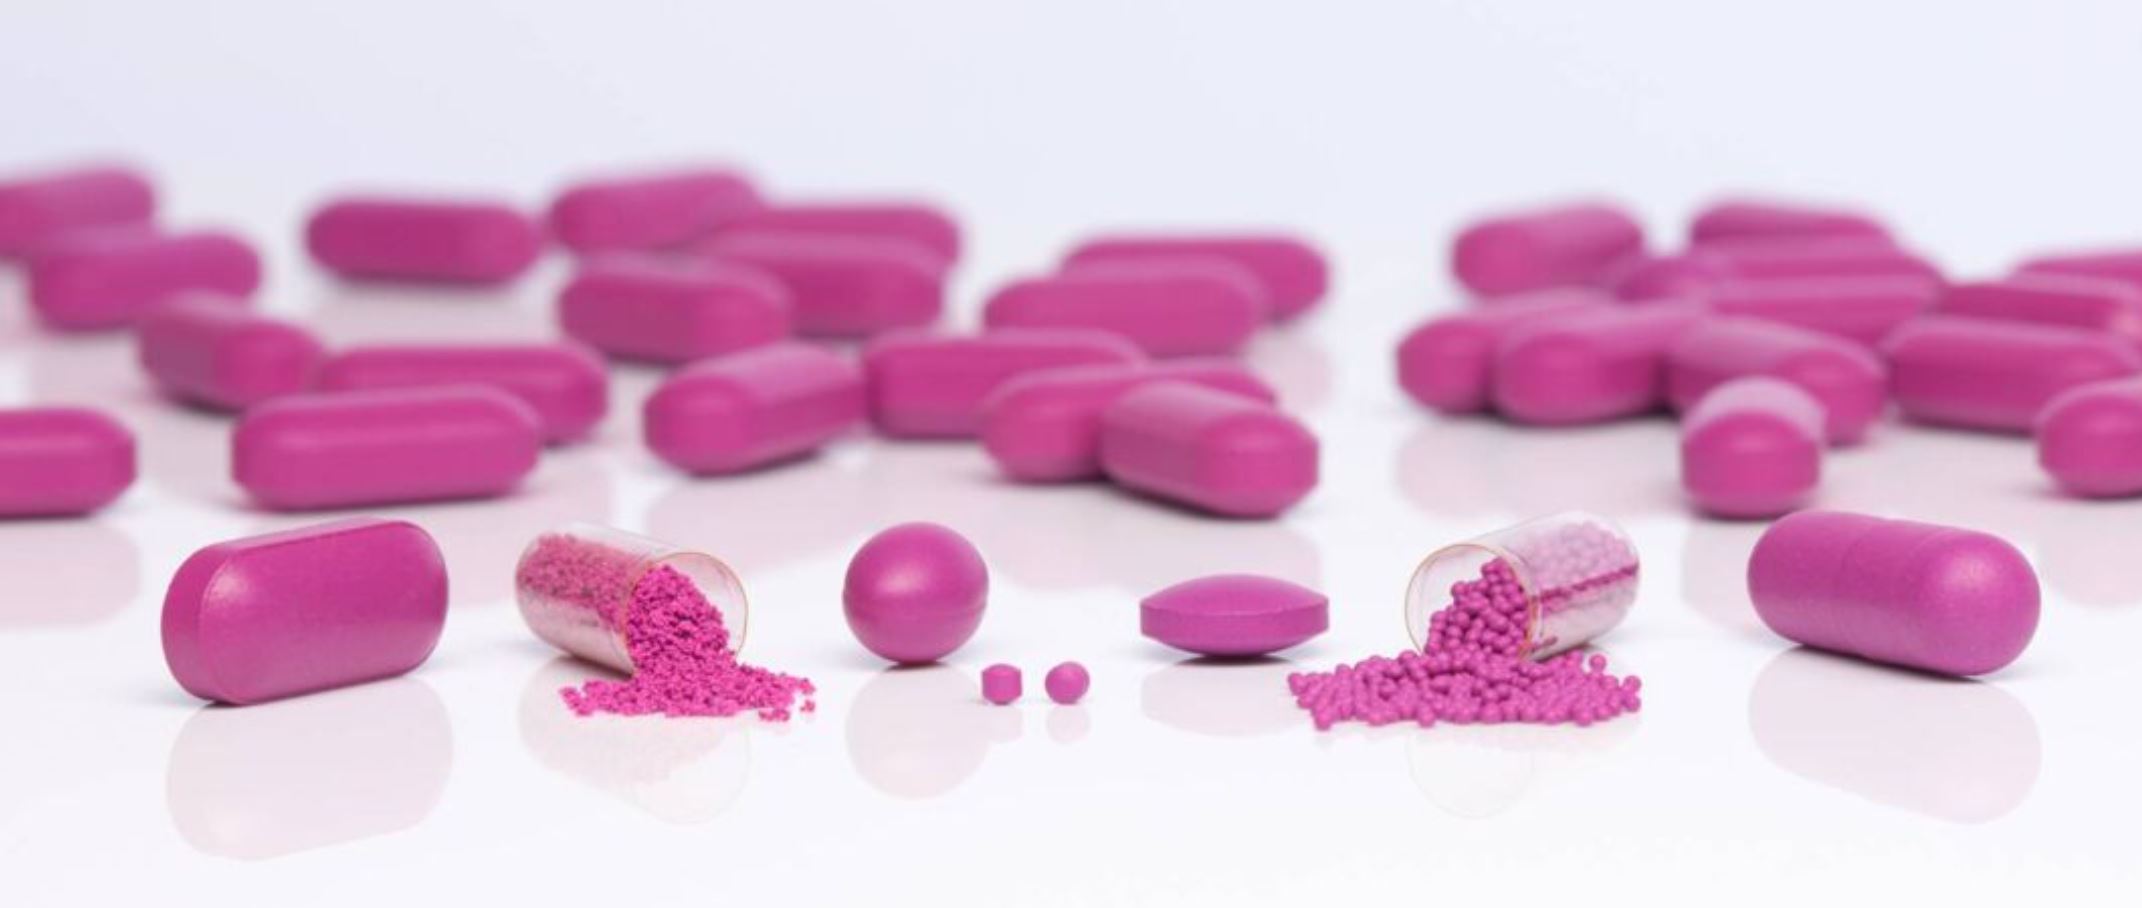 Evonik makes five generations healthier with EUDRAGIT® coatings for targeted drug delivery